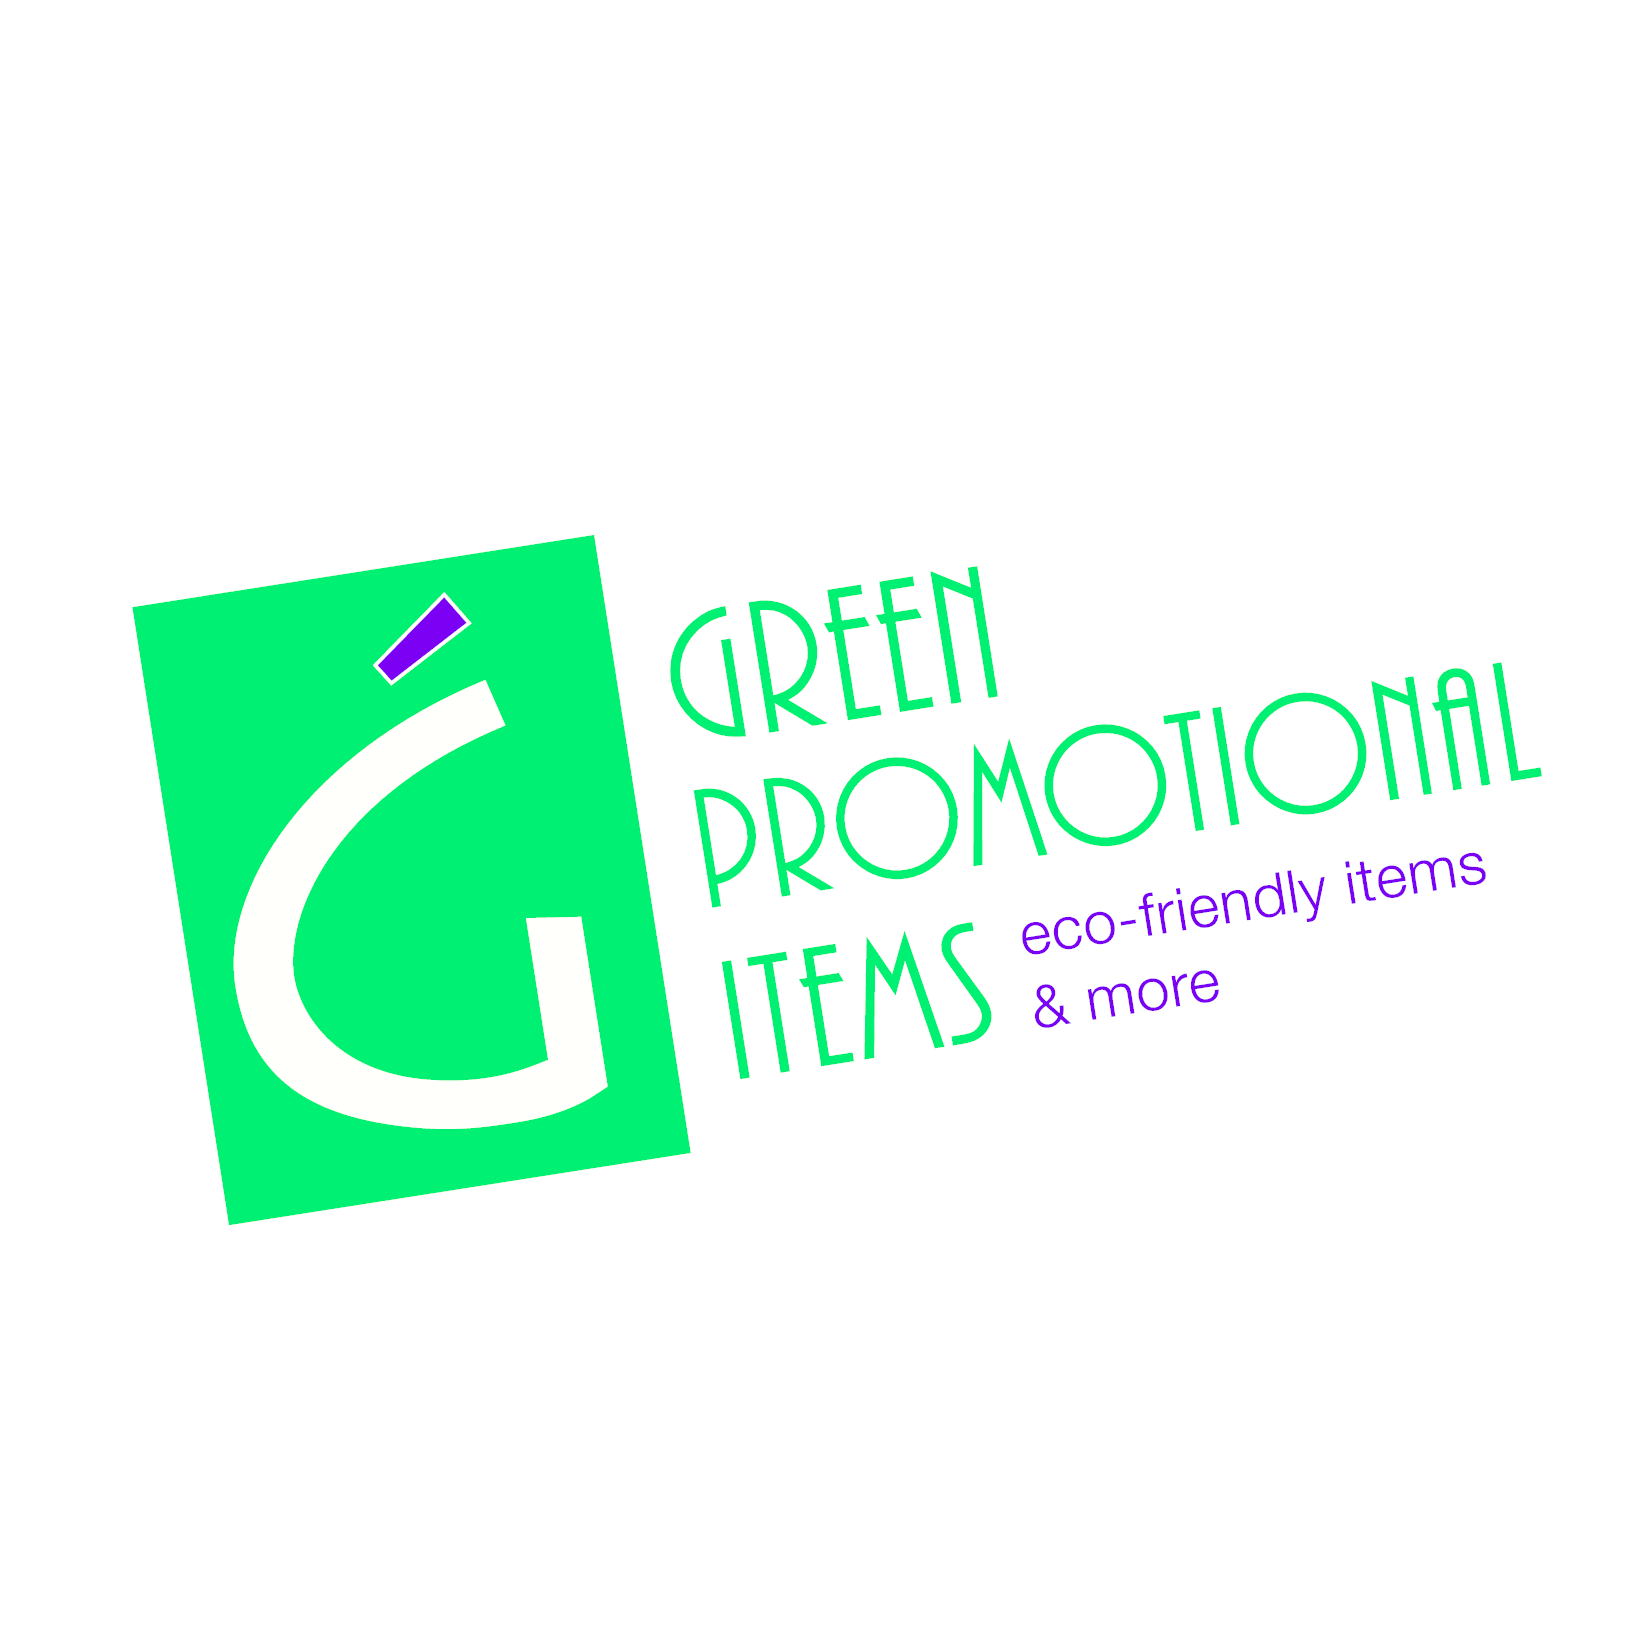 Green Promotional Items